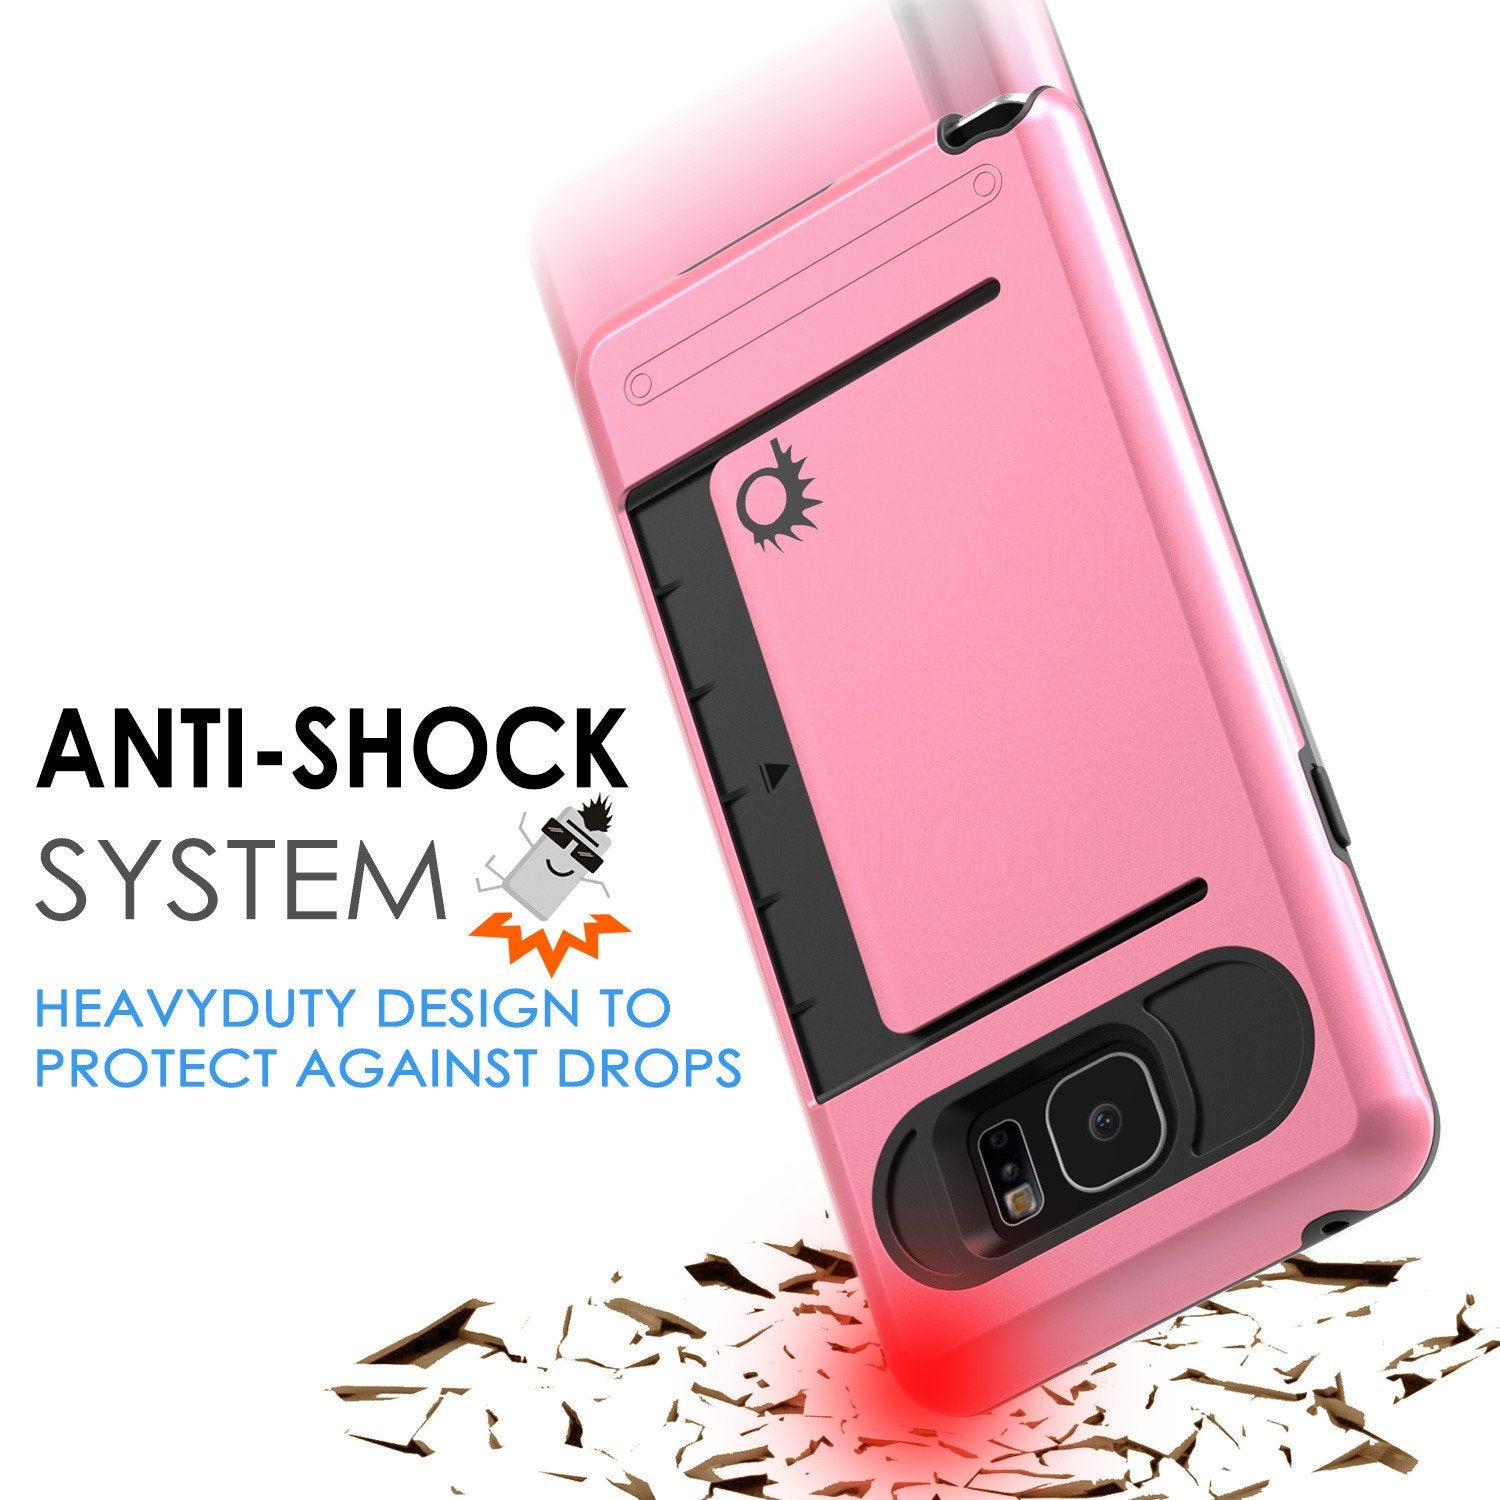 Galaxy Note 5 Case PunkCase CLUTCH Pink Series Slim Armor Soft Cover Case w/ Tempered Glass - PunkCase NZ